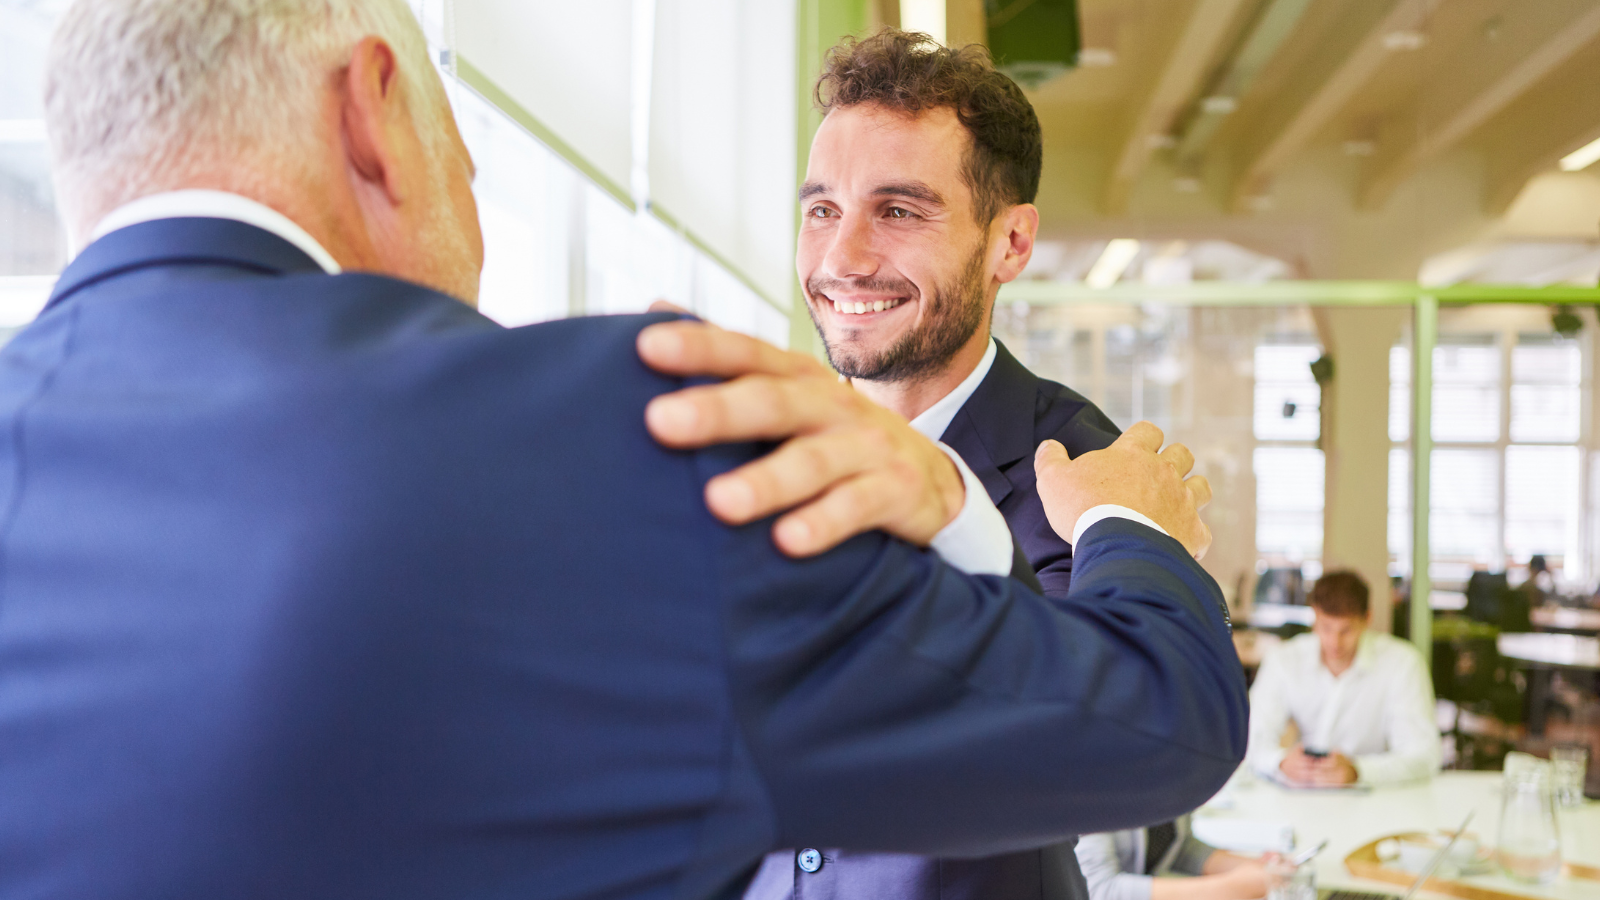 8 Ways to Show Employees You Care Without Increasing Their Pay